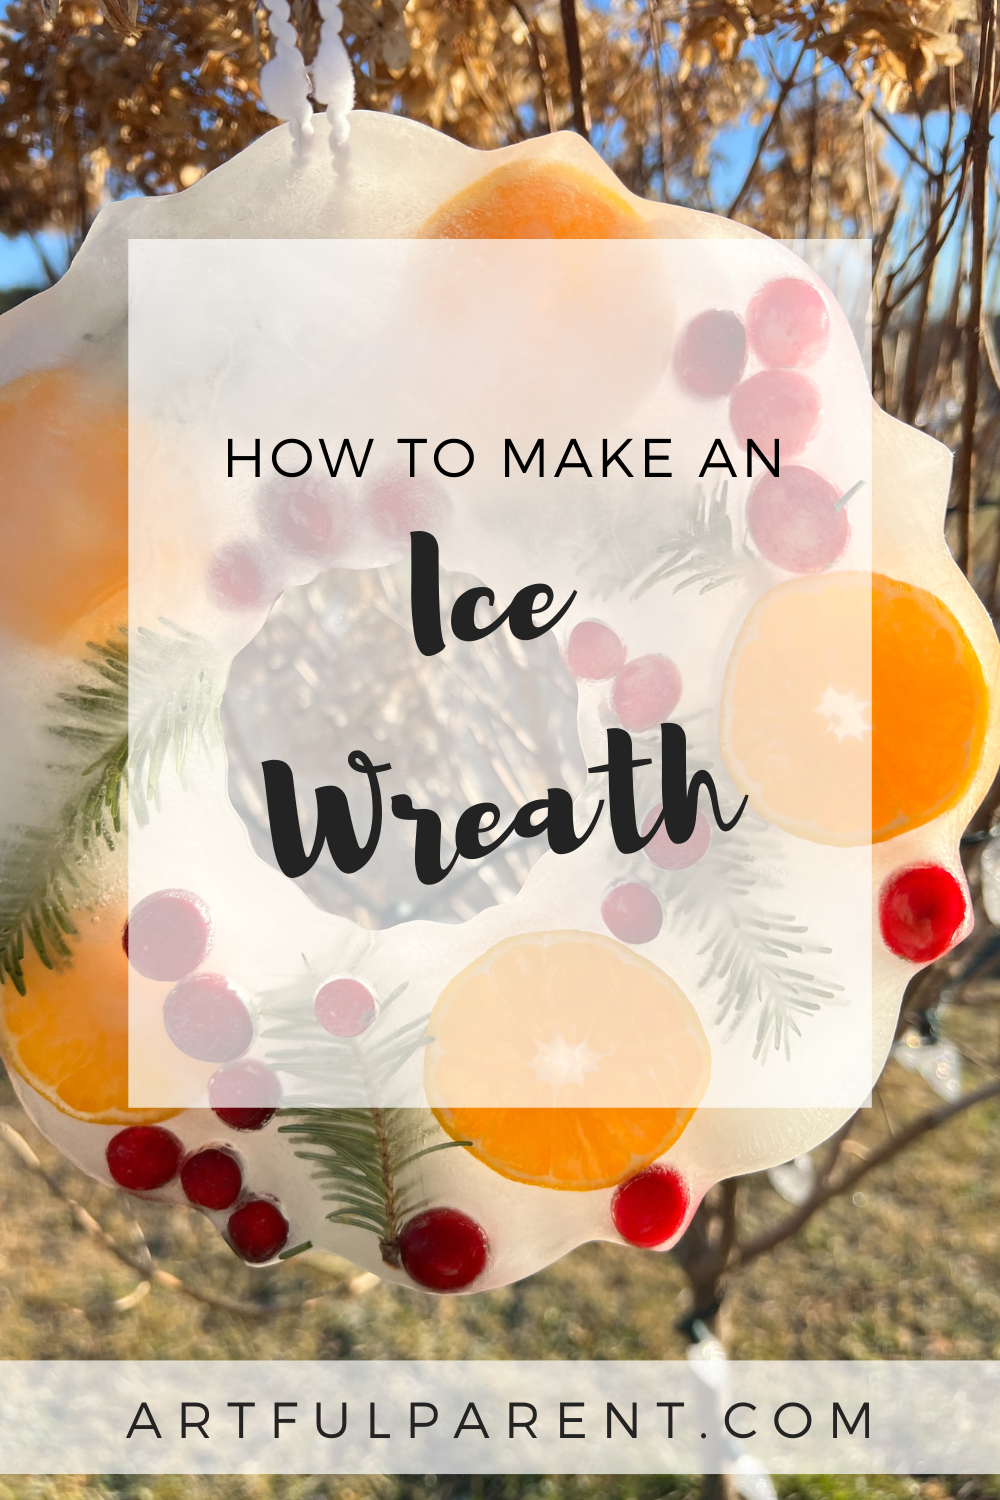 A Winter Craft for Kids: How to Make an Ice Wreath